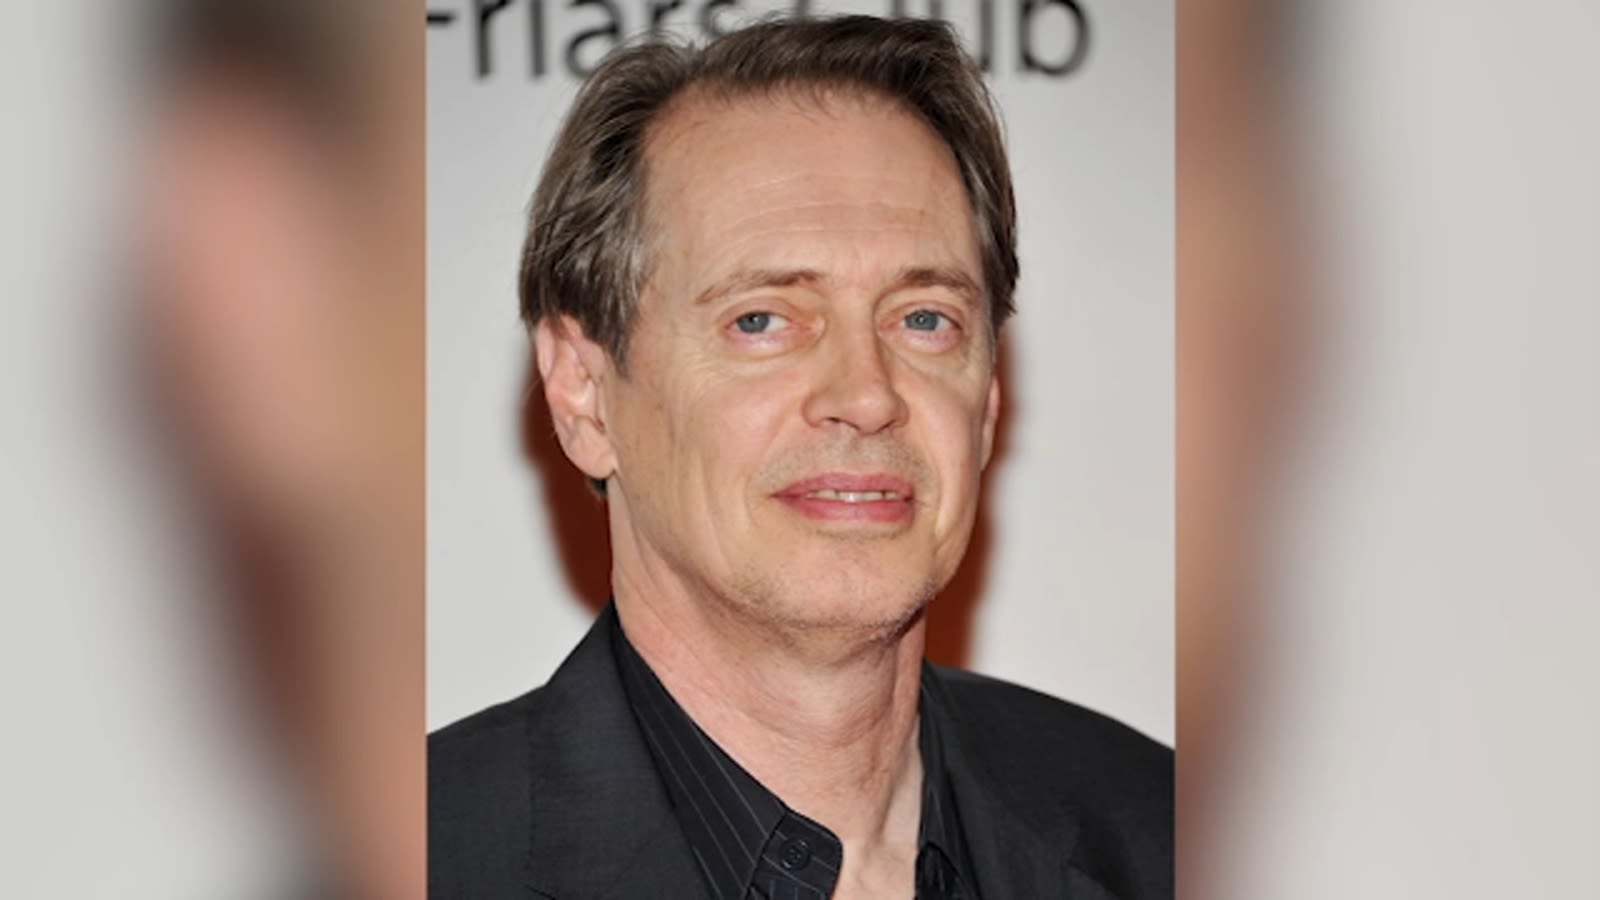 NYPD identifies man wanted after actor Steve Buscemi randomly attacked in Manhattan